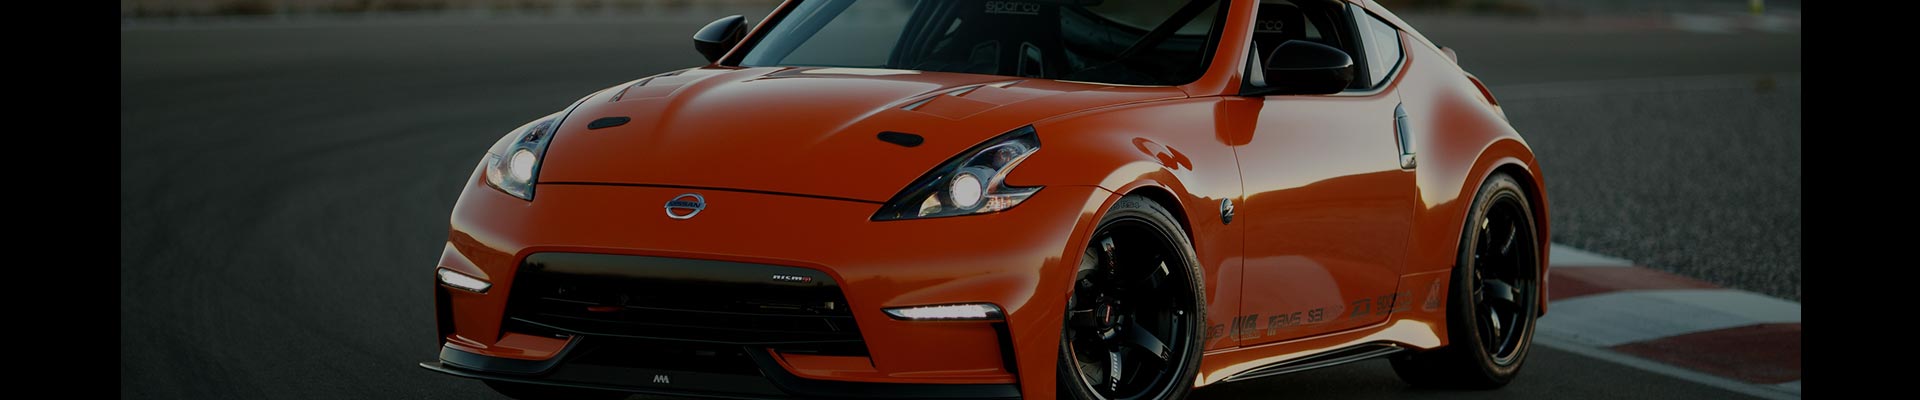 Shop Replacement and OEM 2017 Nissan 370Z Parts with Discounted Price on the Net